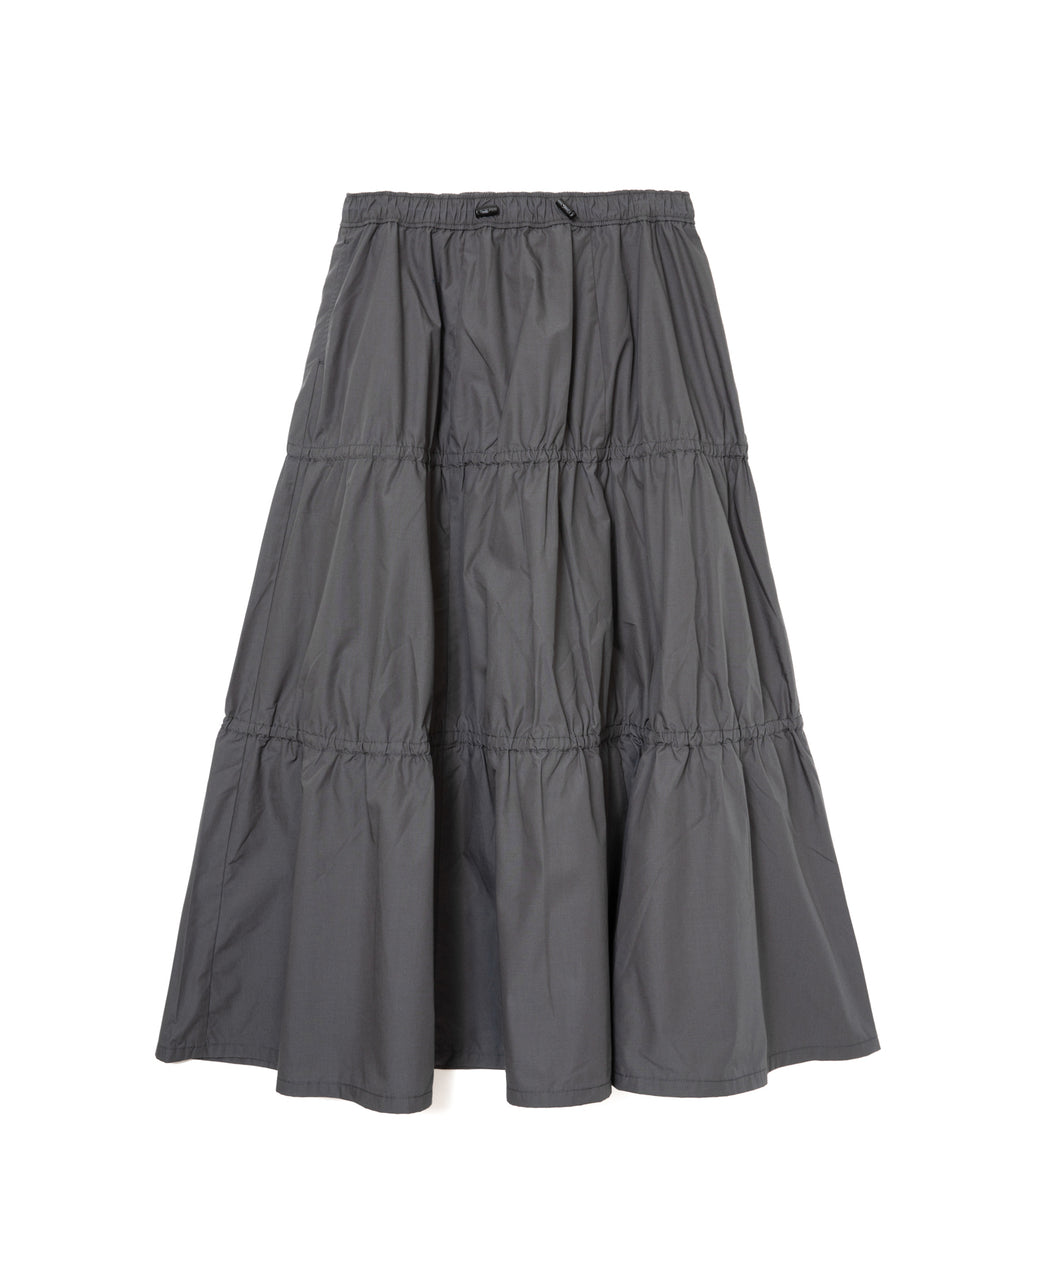 【WOMEN】THE NORTH FACE PURPLE LABEL 65/35 Field Tiered Skirt